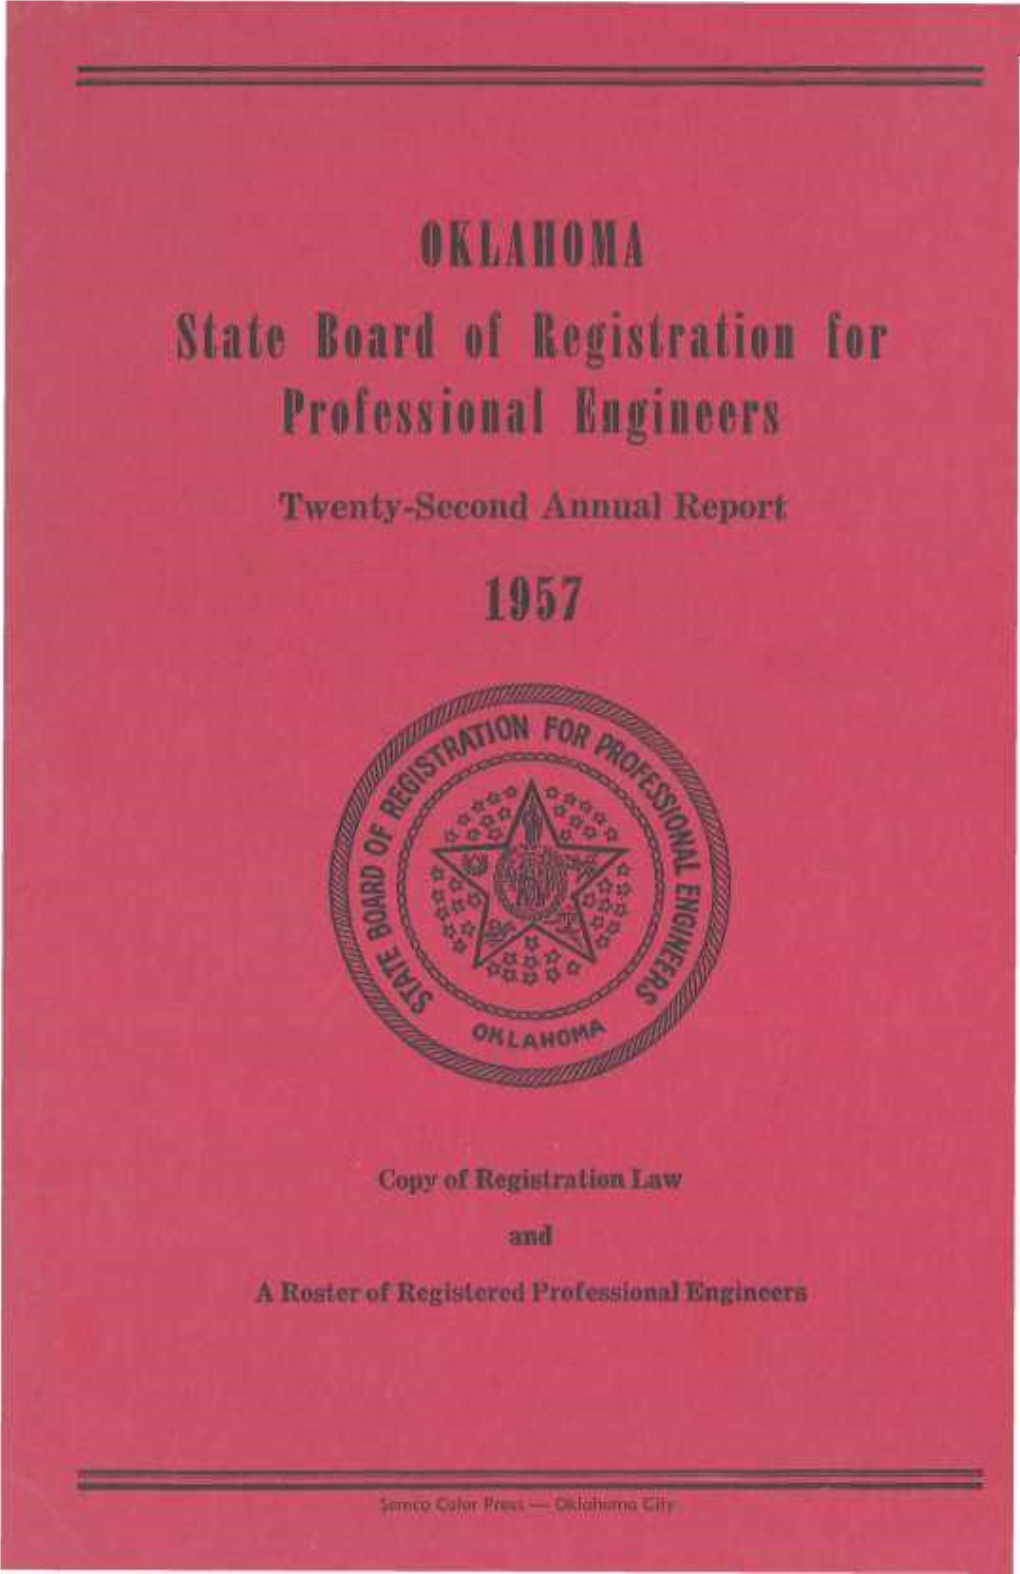 OKLAHOMA State Board of Registration for Professional Engineers Twenty-Second Annual Report 1957